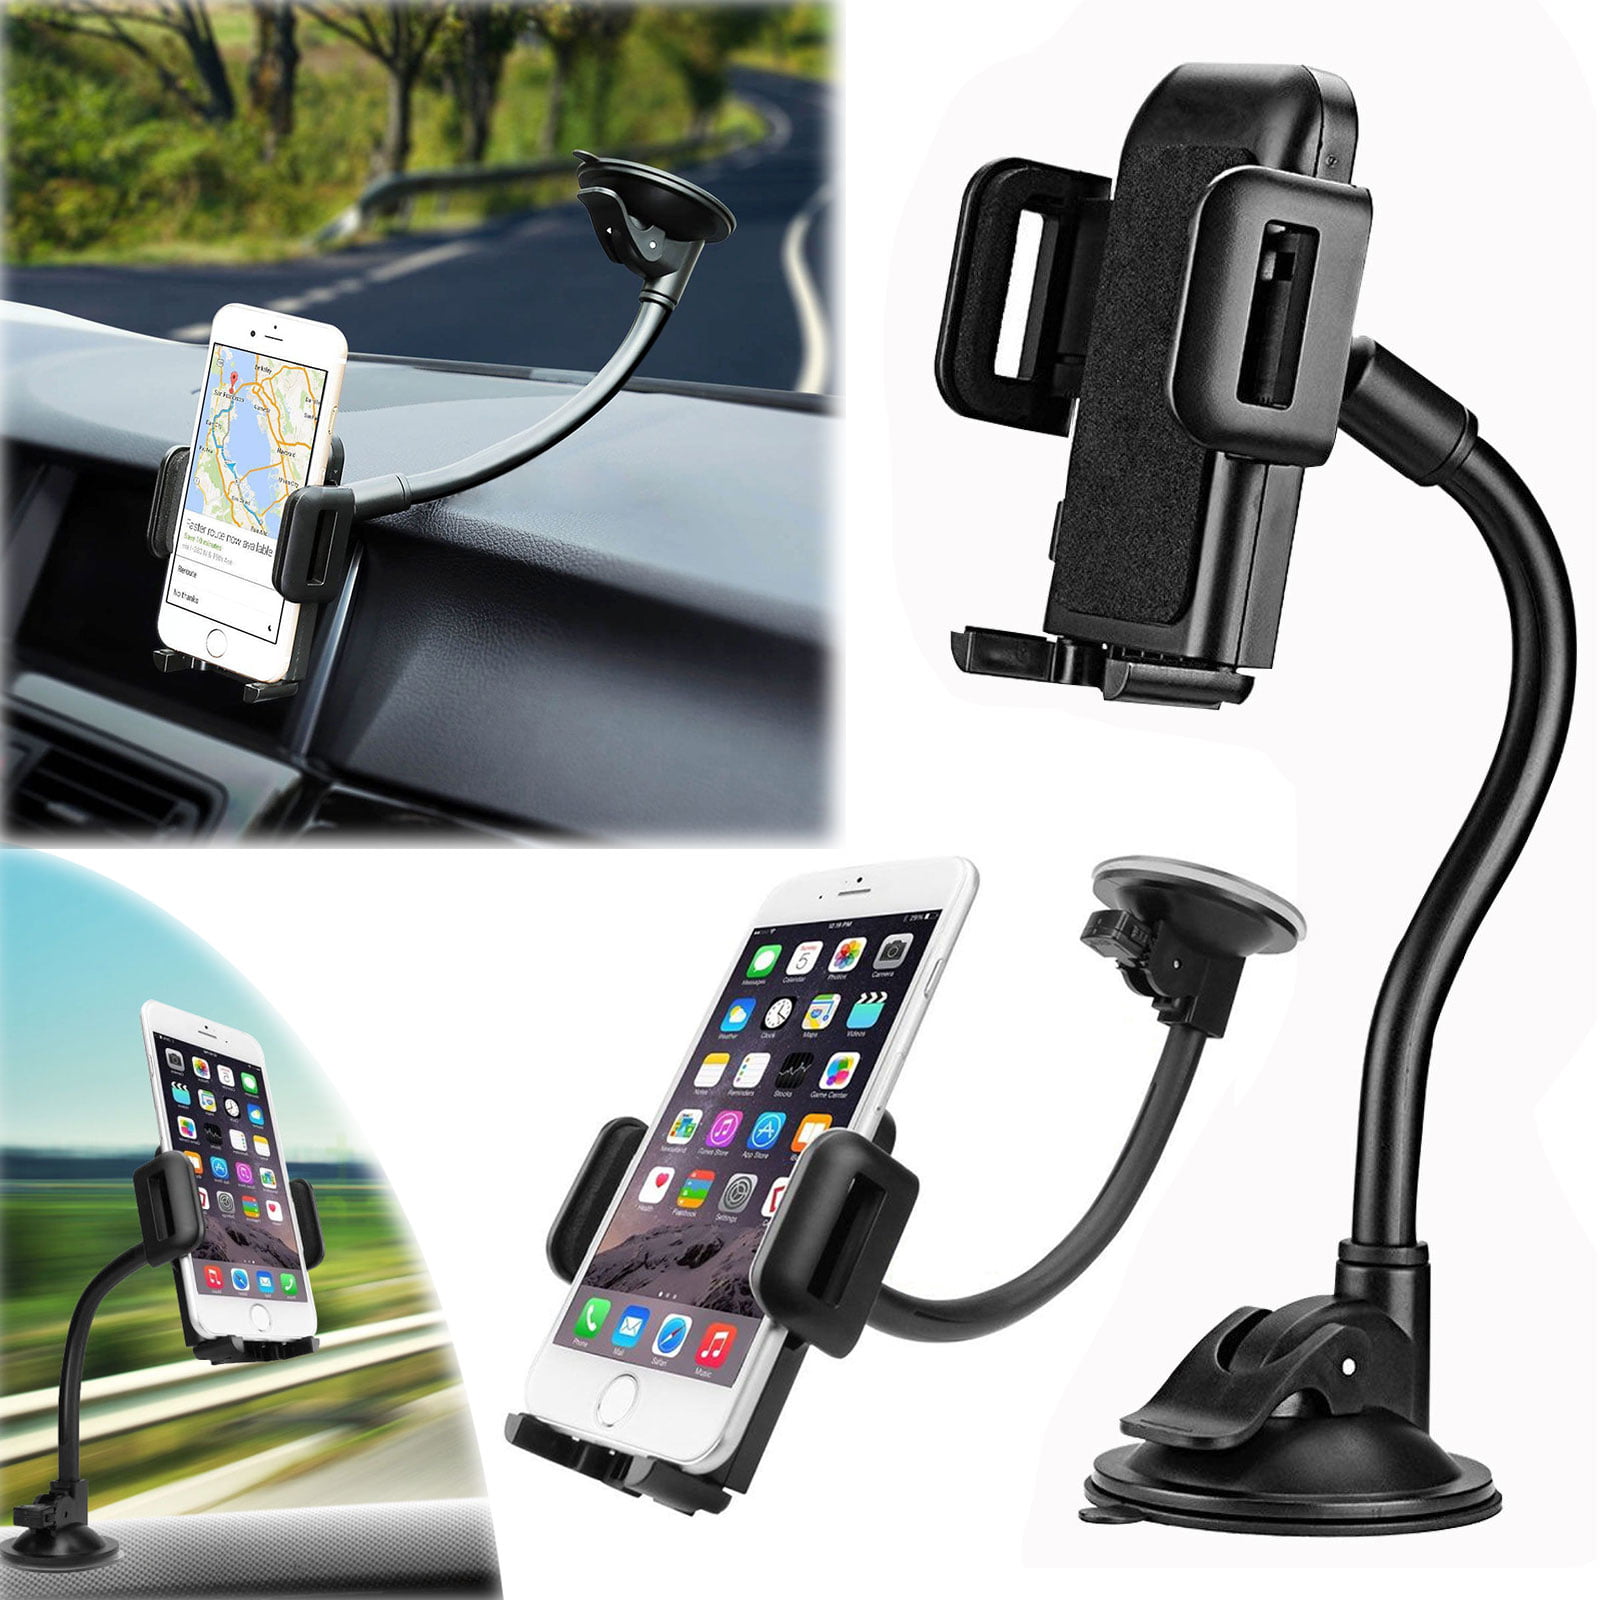 Auto-Grip Car Phone Holder Universal For Samsung Galaxy S10/ iPhone 8/8Plus 